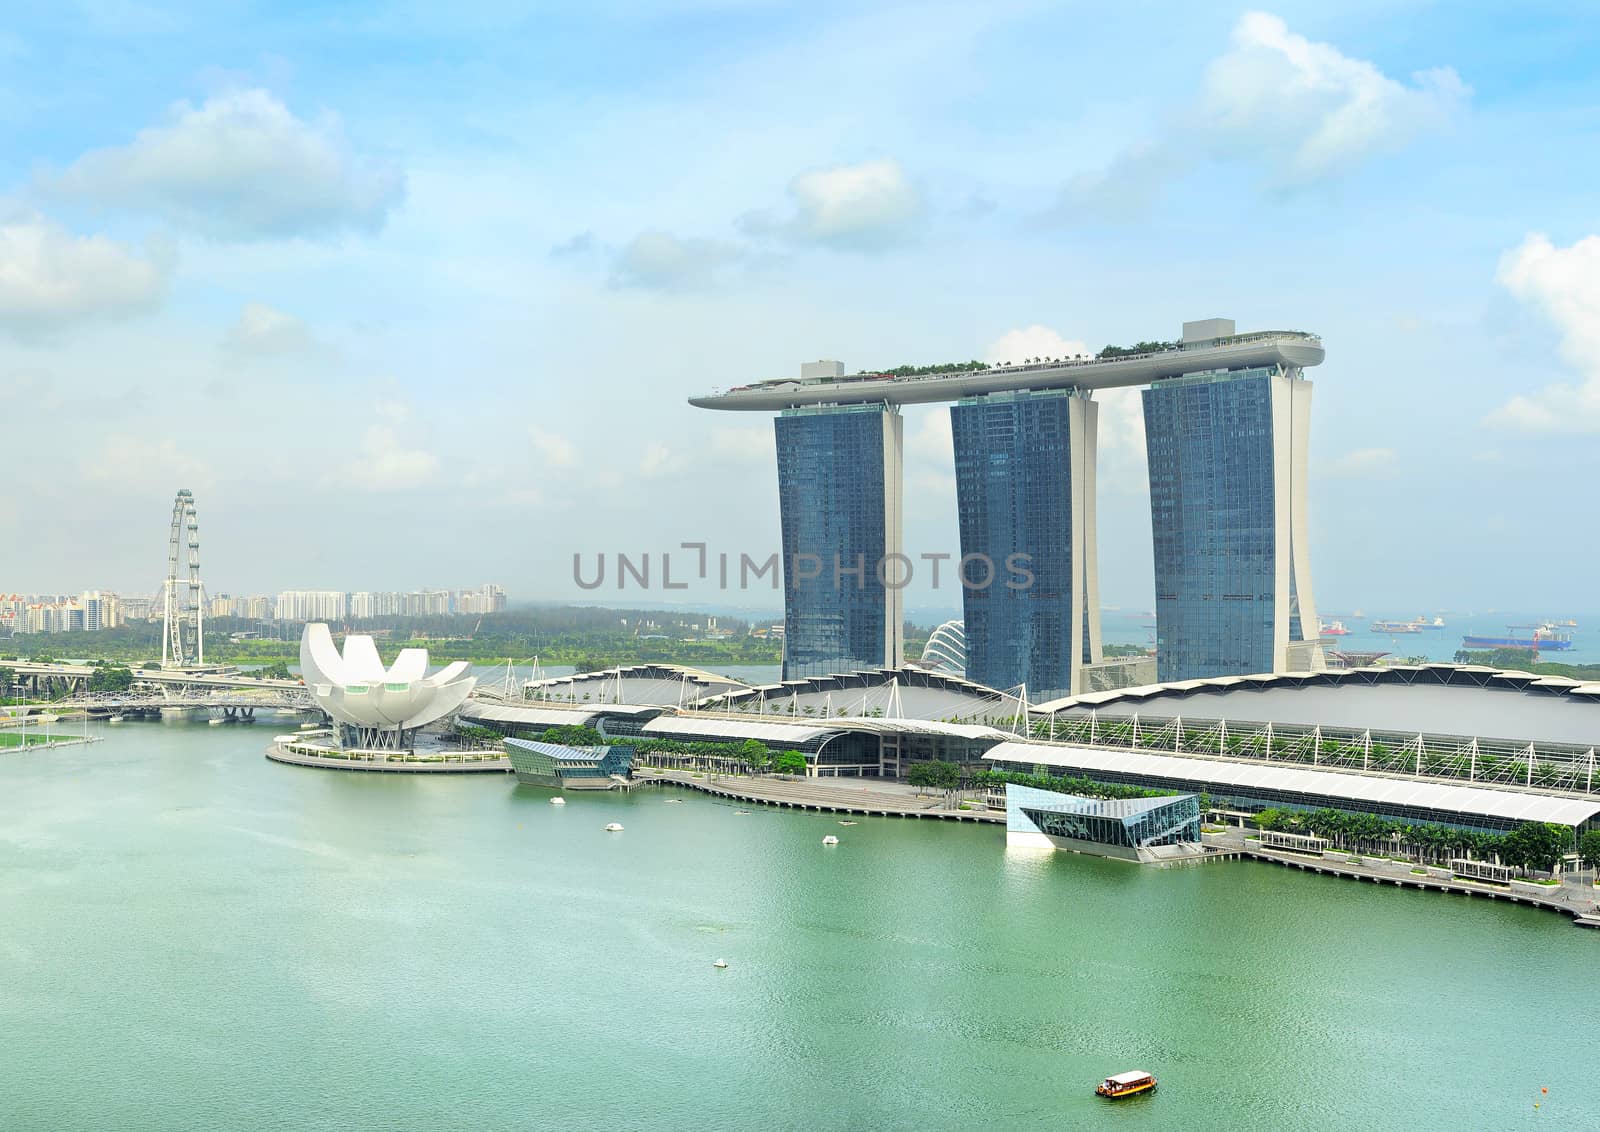 Marina Bay Sands Resort  in Singapore. It is billed as the world's most expensive standalone casino property at S$8 billion